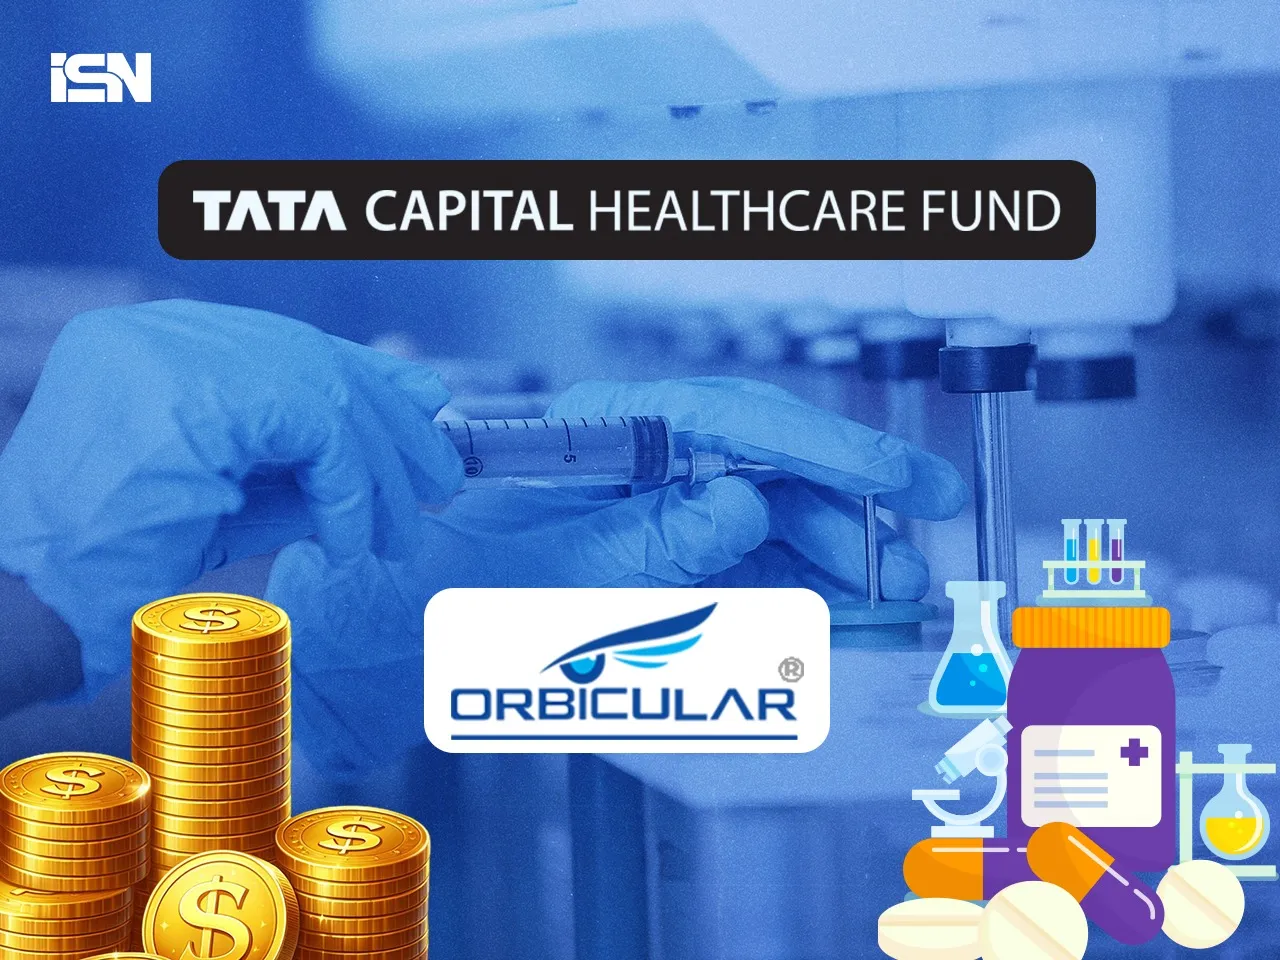 Tata Capital Healthcare Fund invests in Orbicular Pharmaceutical Technologies